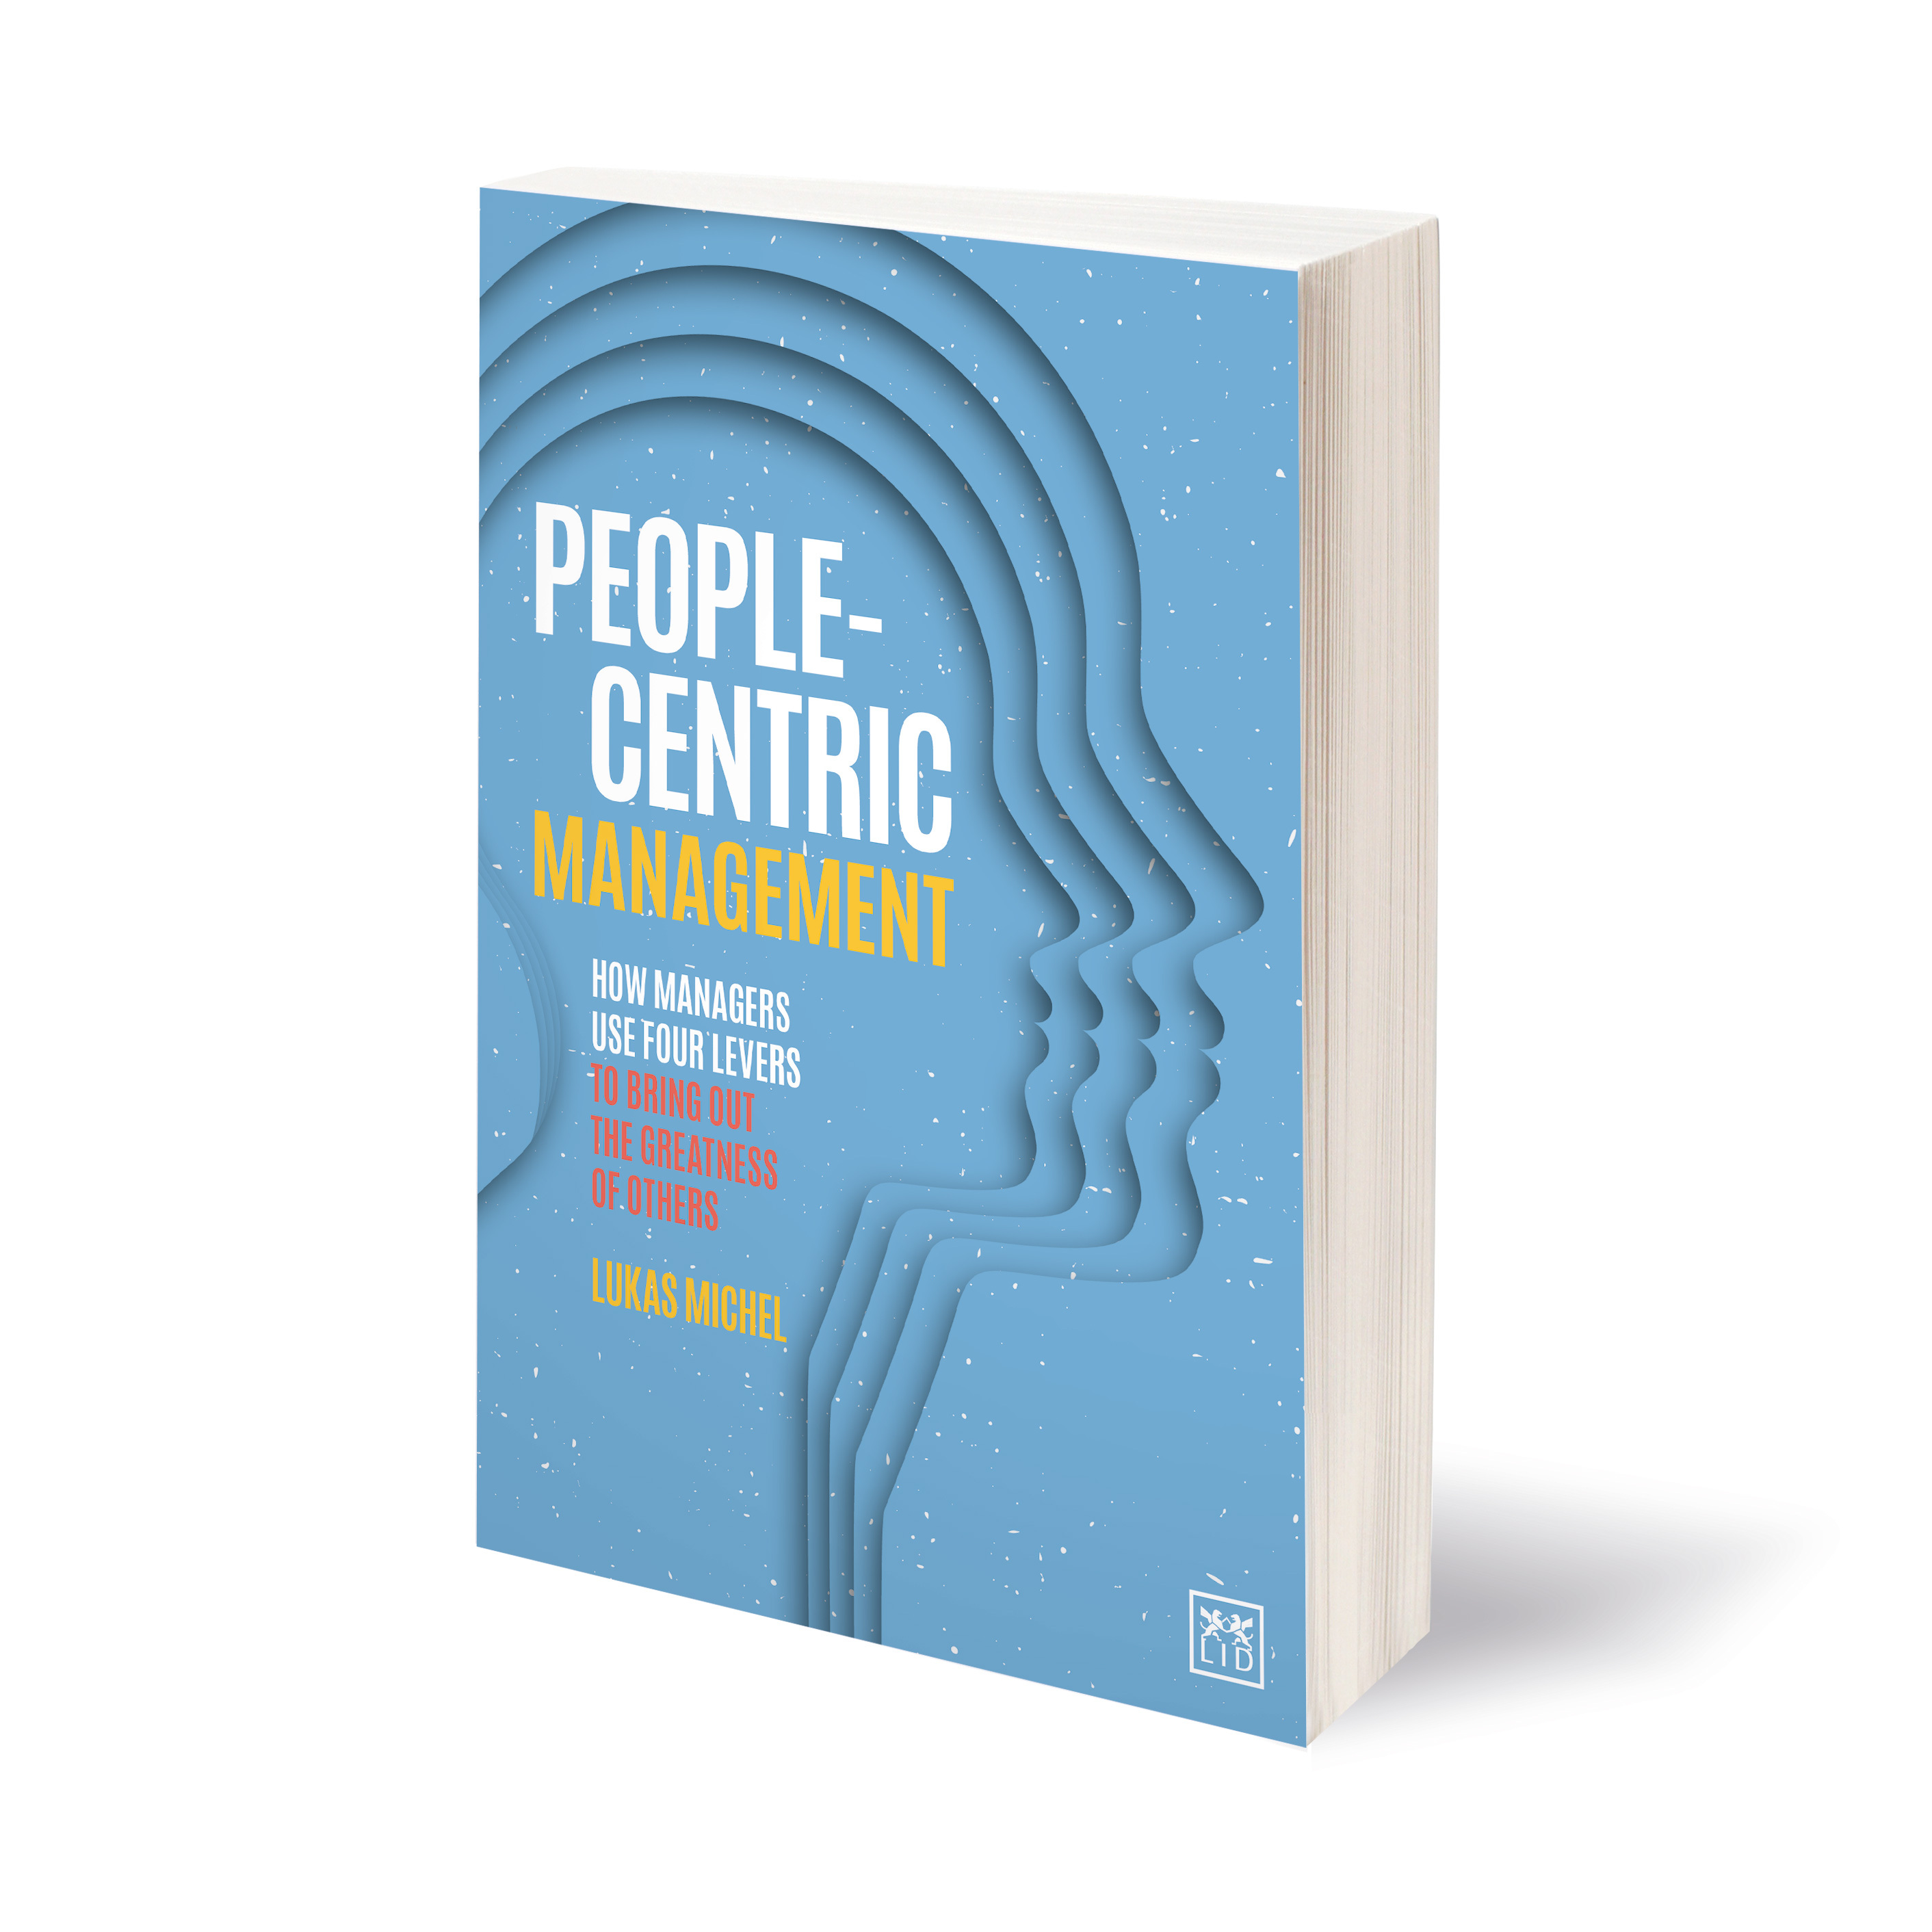 PEOPLE-CENTRIC MANAGEMENT